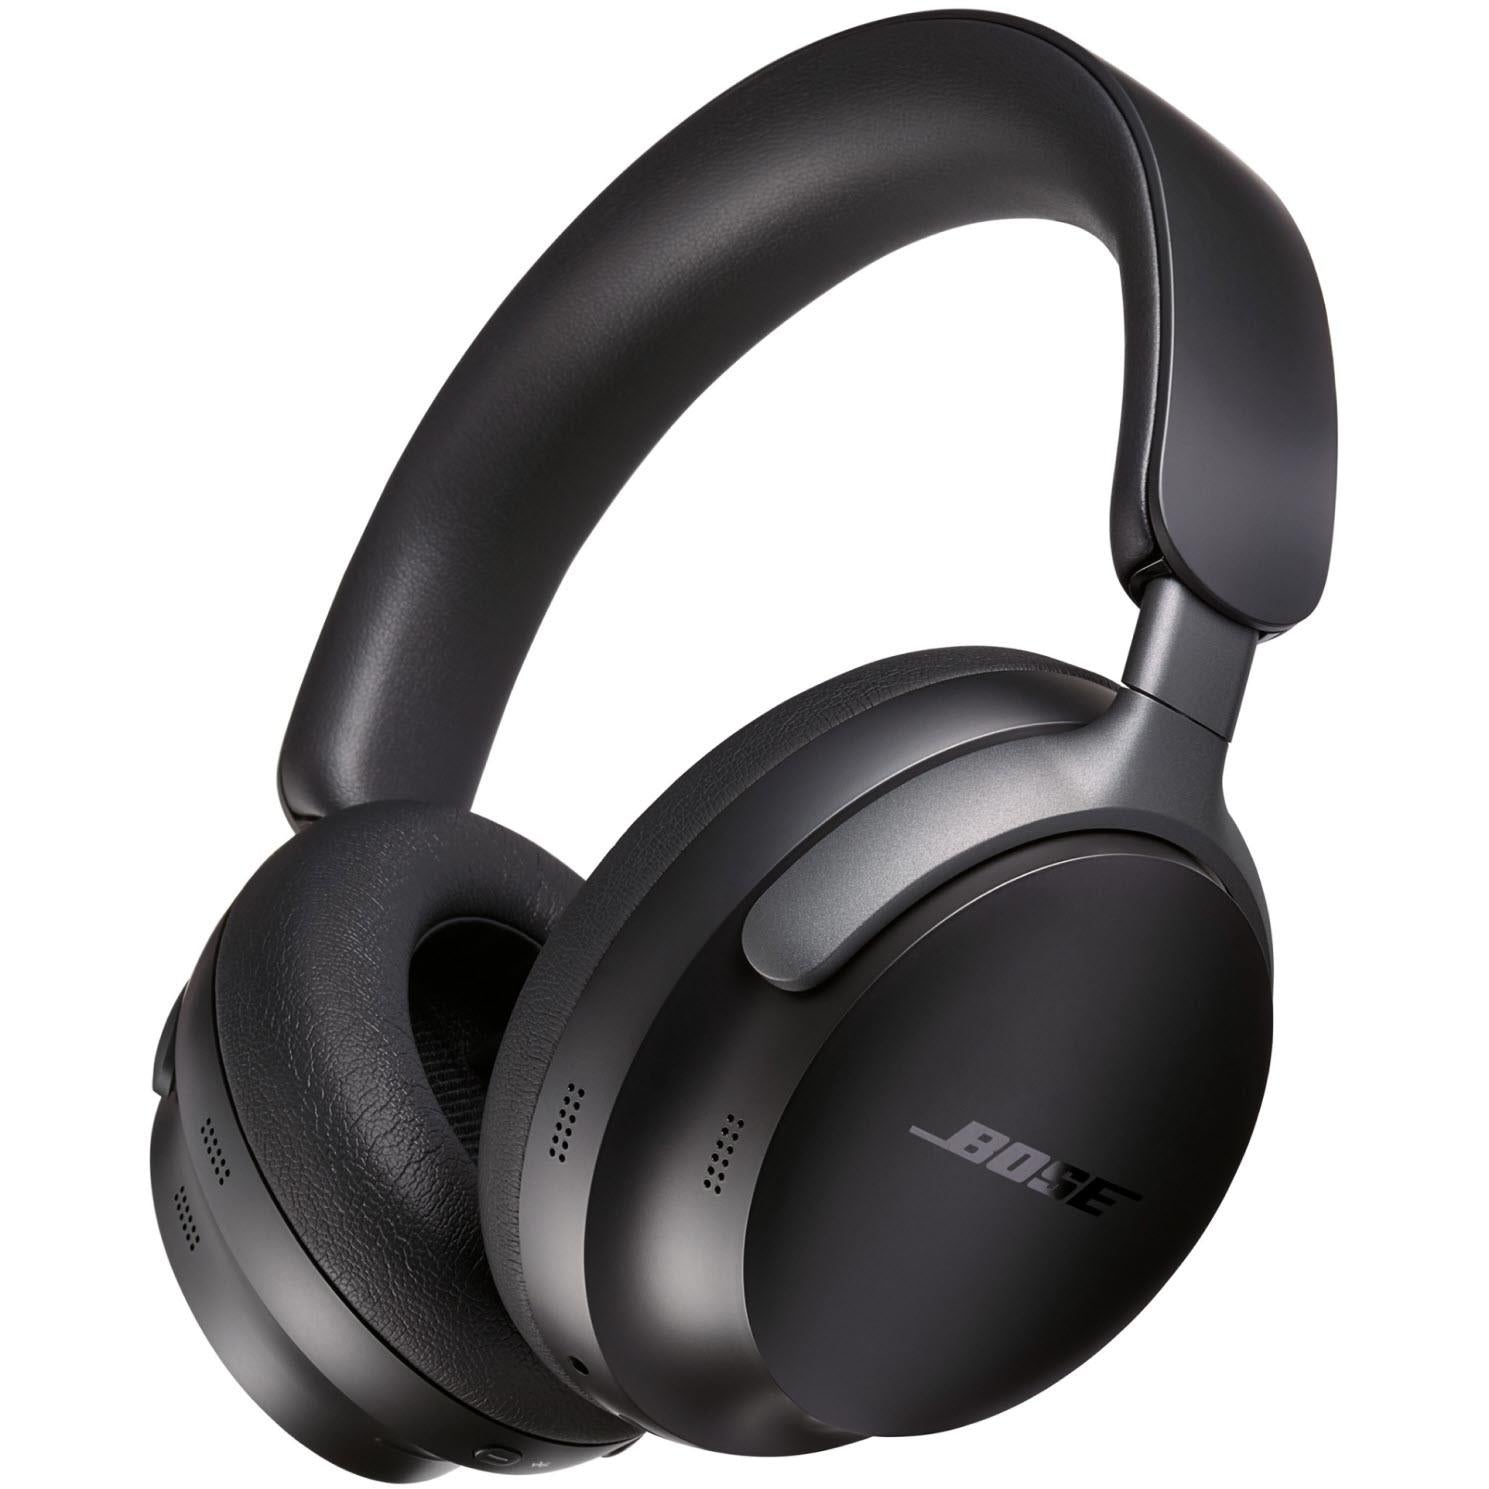 The Bose QC 35 II Headphones Now Powered by Google Assistant